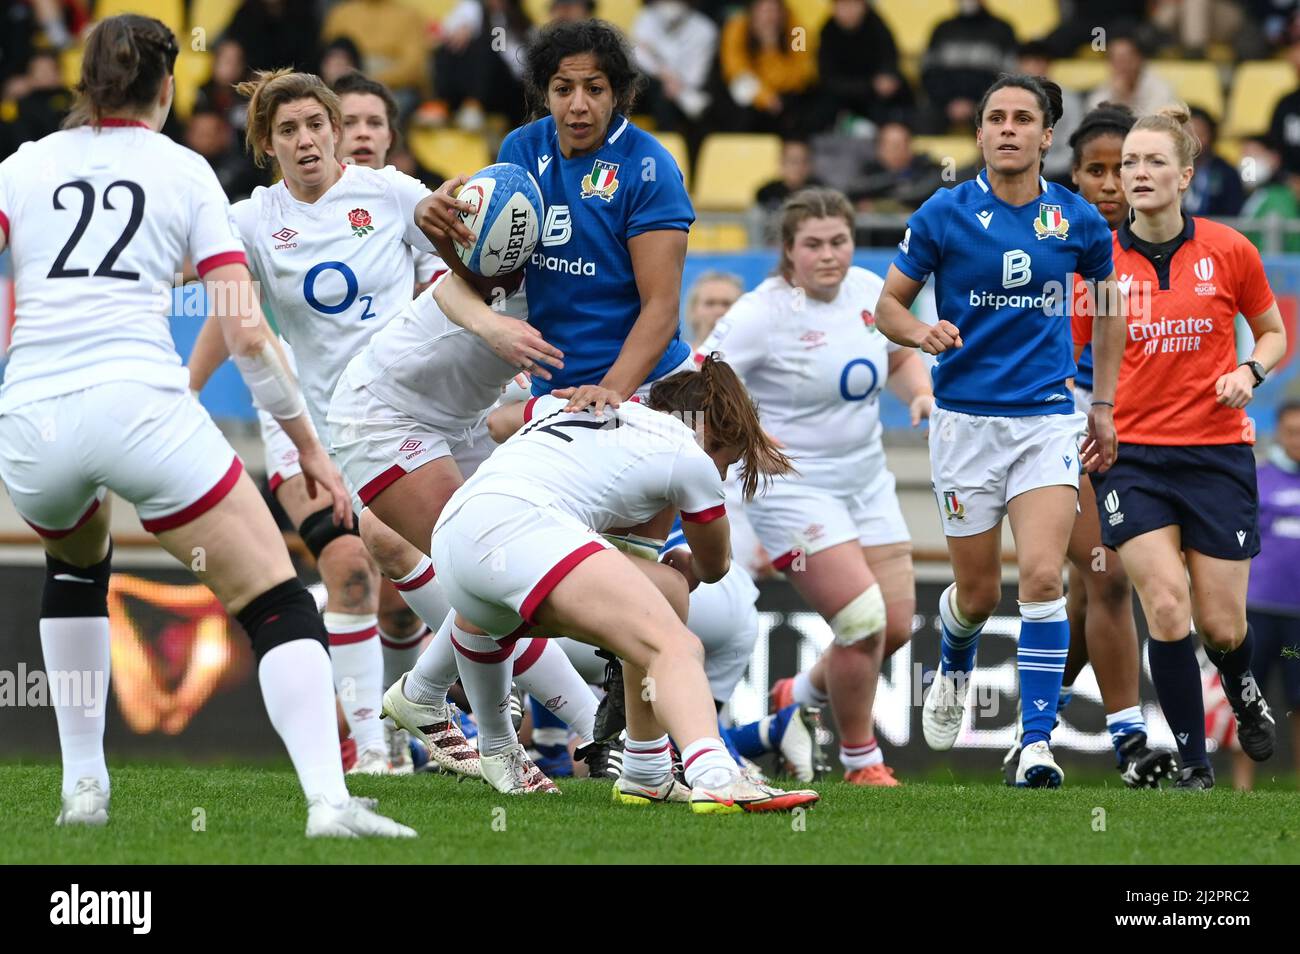 Parma, Italy. 03rd Apr, 2022. Sergio Lanfranchi stadium, Parma, Italy,  April 03, 2022, sara tounesi (italy) during Women Six Nations 2022 - Italy  vs England - Rugby Six Nations match Credit: Live